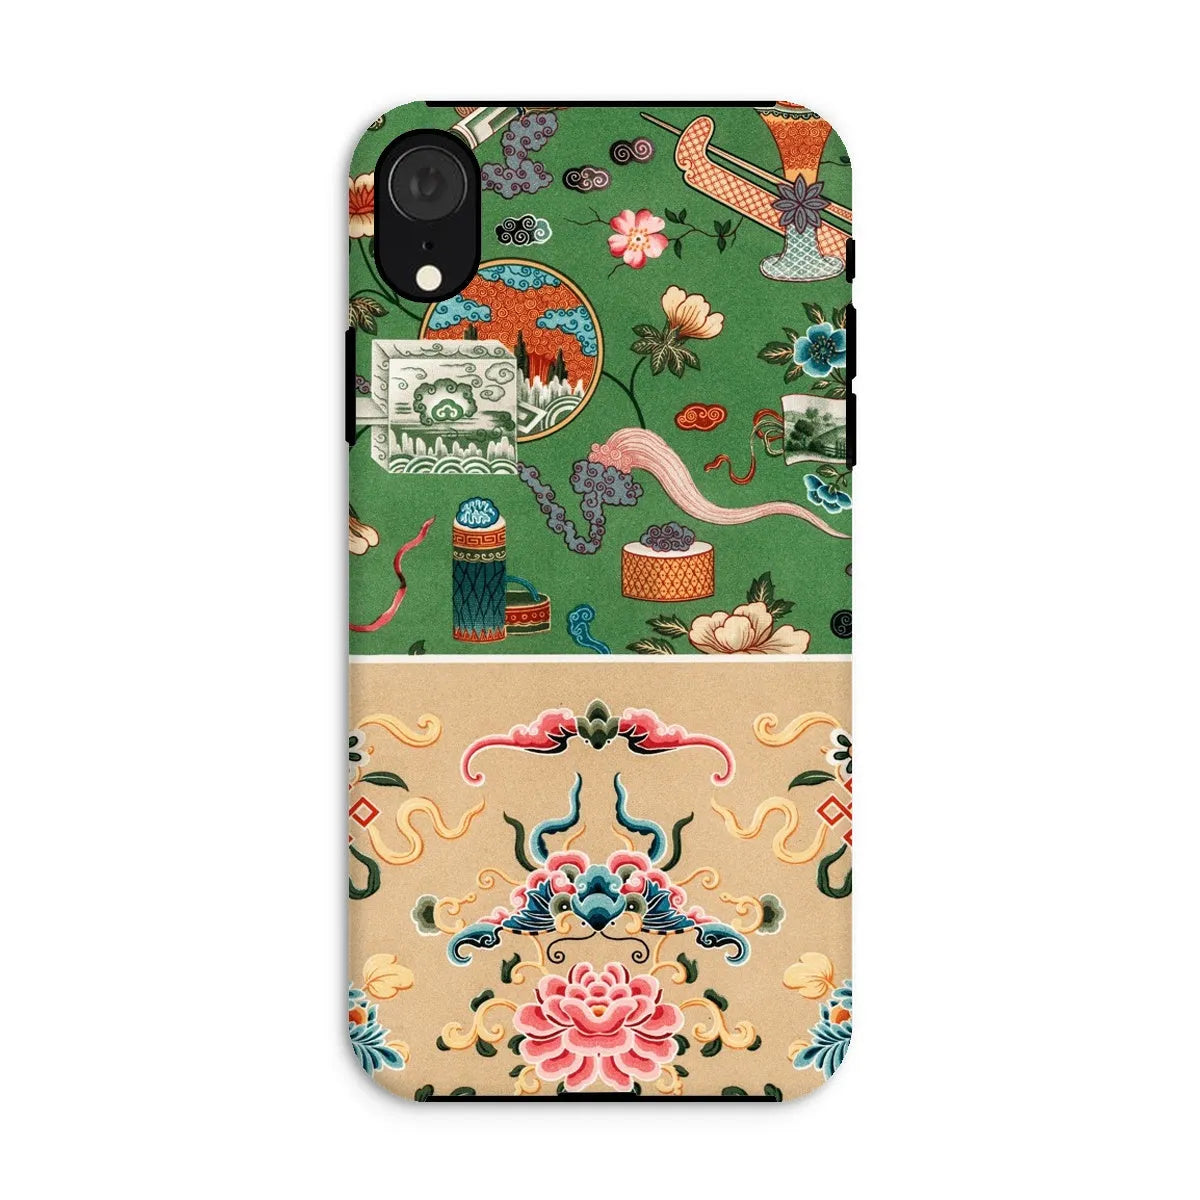 This Chinese Pattern By Auguste Racinet Tough Phone Case - Iphone Xr / Matte - Mobile Phone Cases - Aesthetic Art